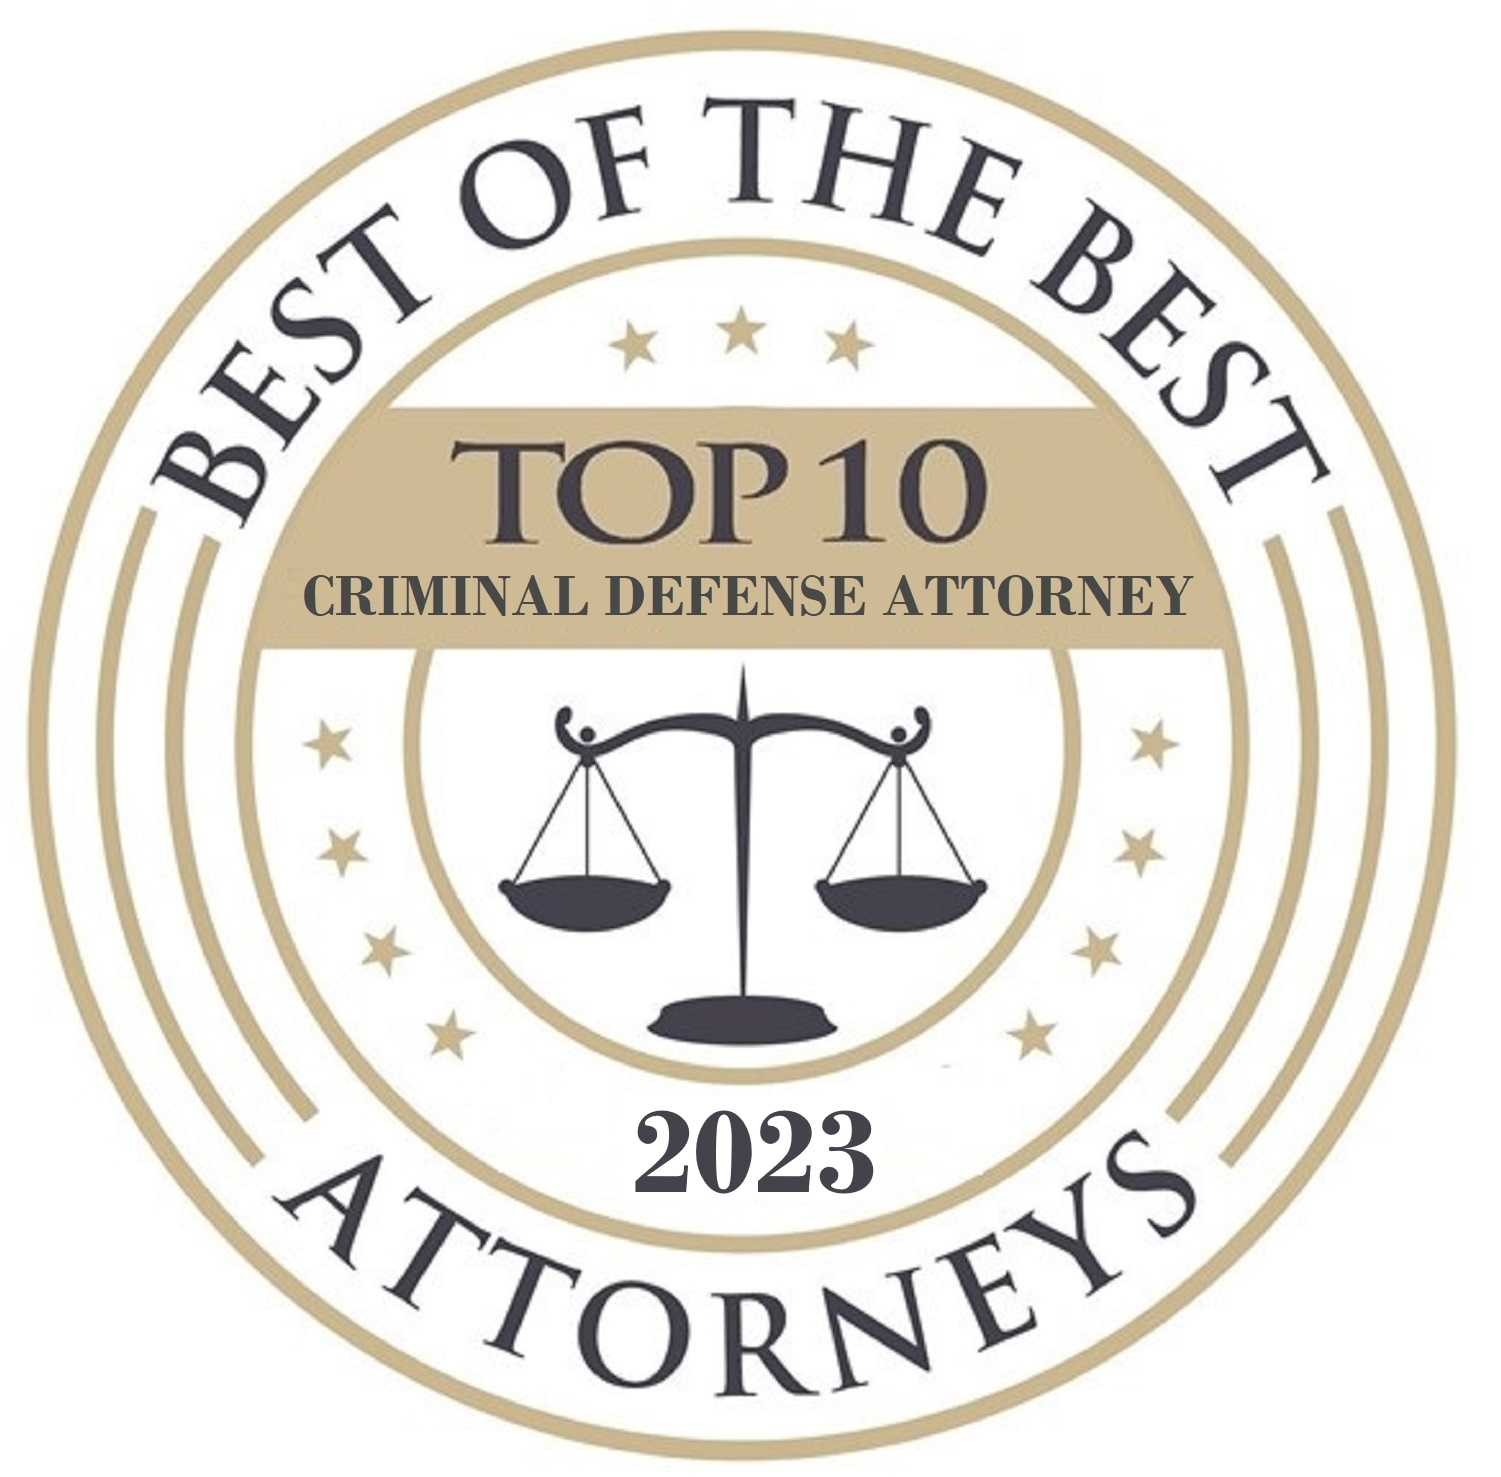 Best Of The Best Attorneys Top 10 criminal defence Attorney 2023